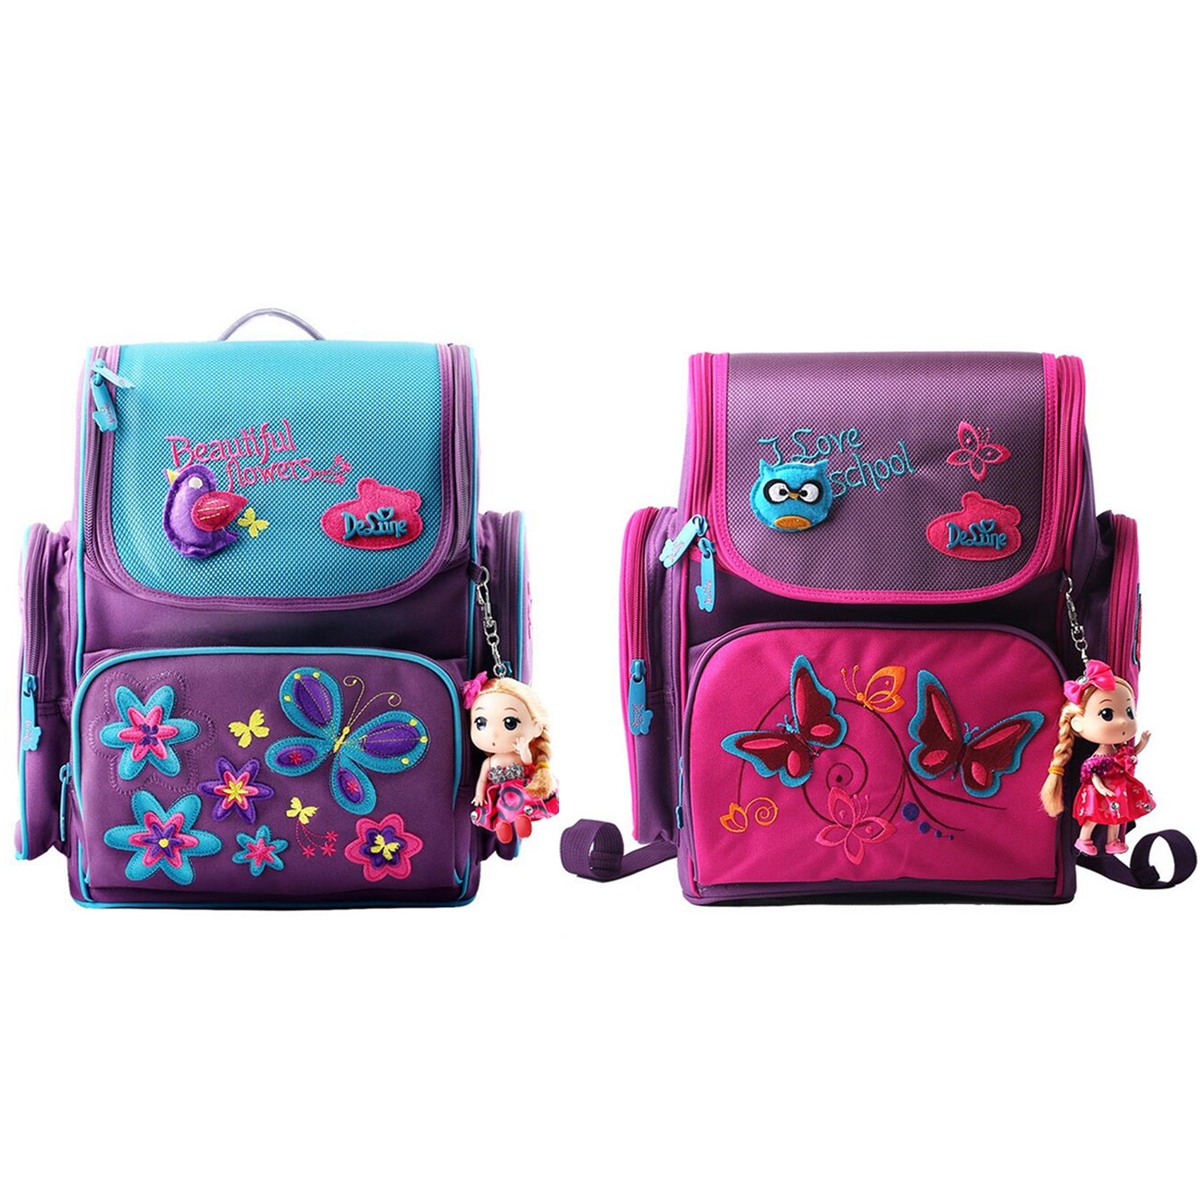 18L-Girls-Kids-Cartoon-School-Bag-Reflective-Safety-Waterproof-Children-Backpack-With-Doll-Pendant-1352202-1